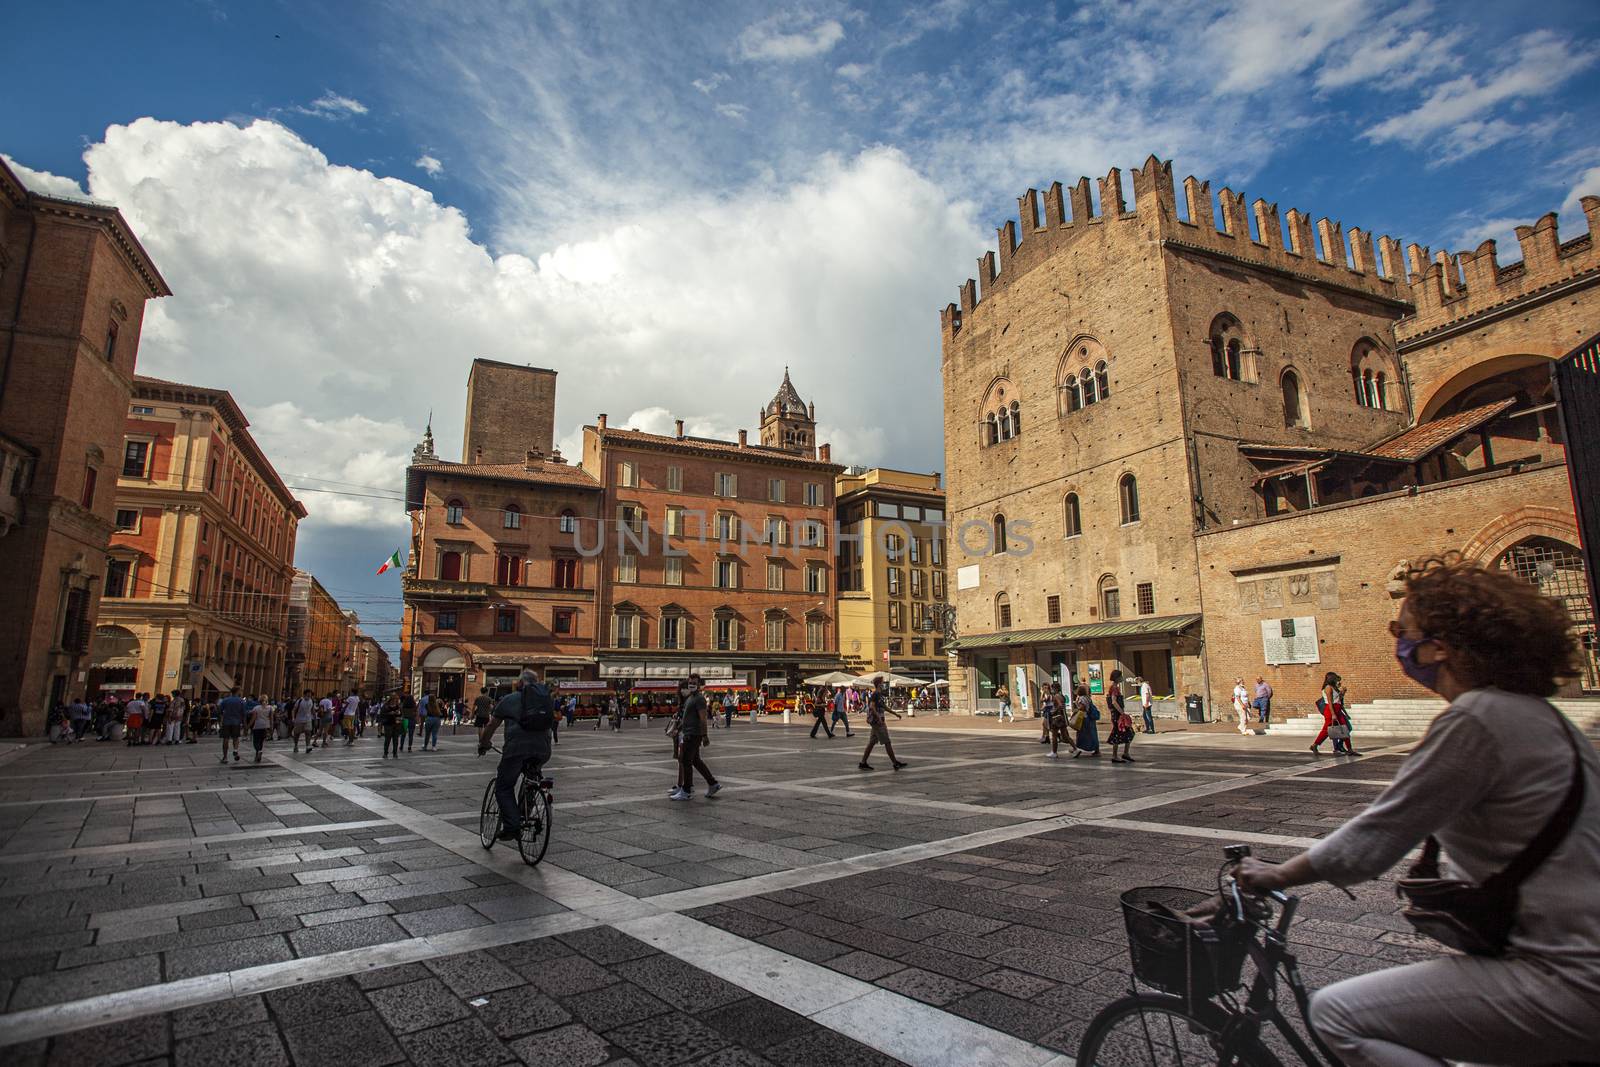 BOLOGNA, ITALY 17 JUNE 2020: Palazzo Re Enzo: a famous historic building in Bologna, Italy with people walking in the square